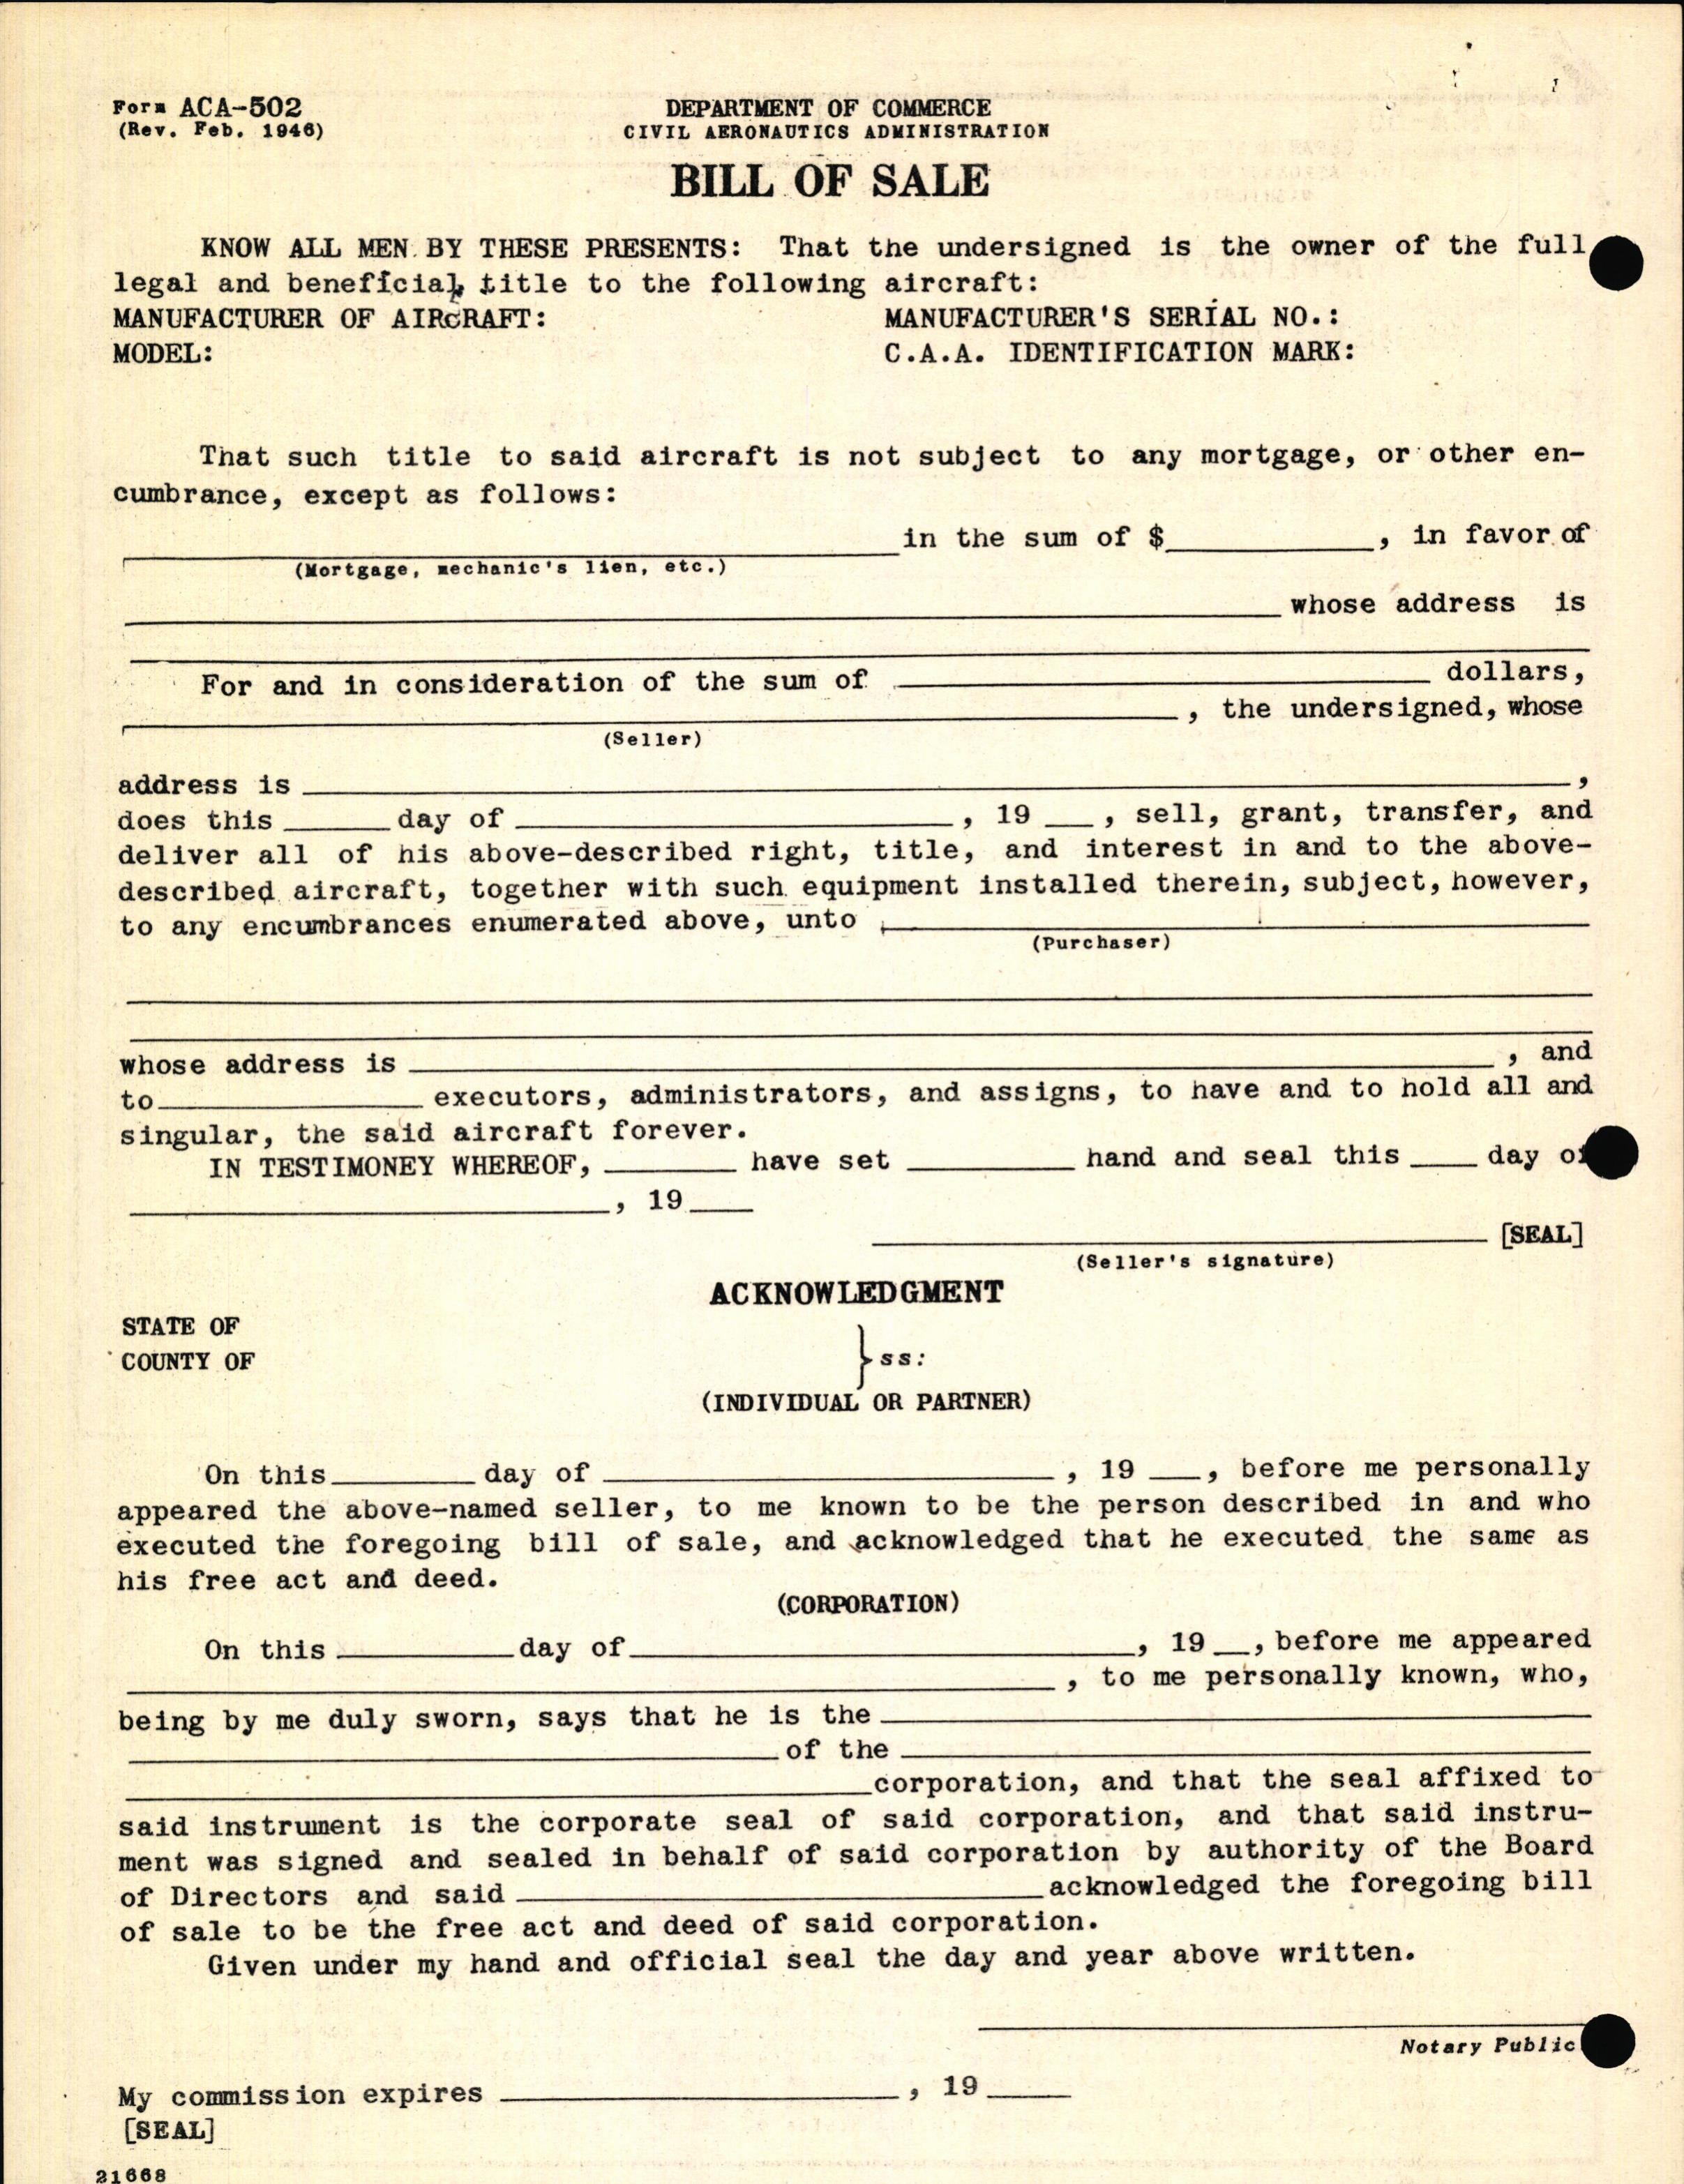 Sample page 4 from AirCorps Library document: Technical Information for Serial Number 2051